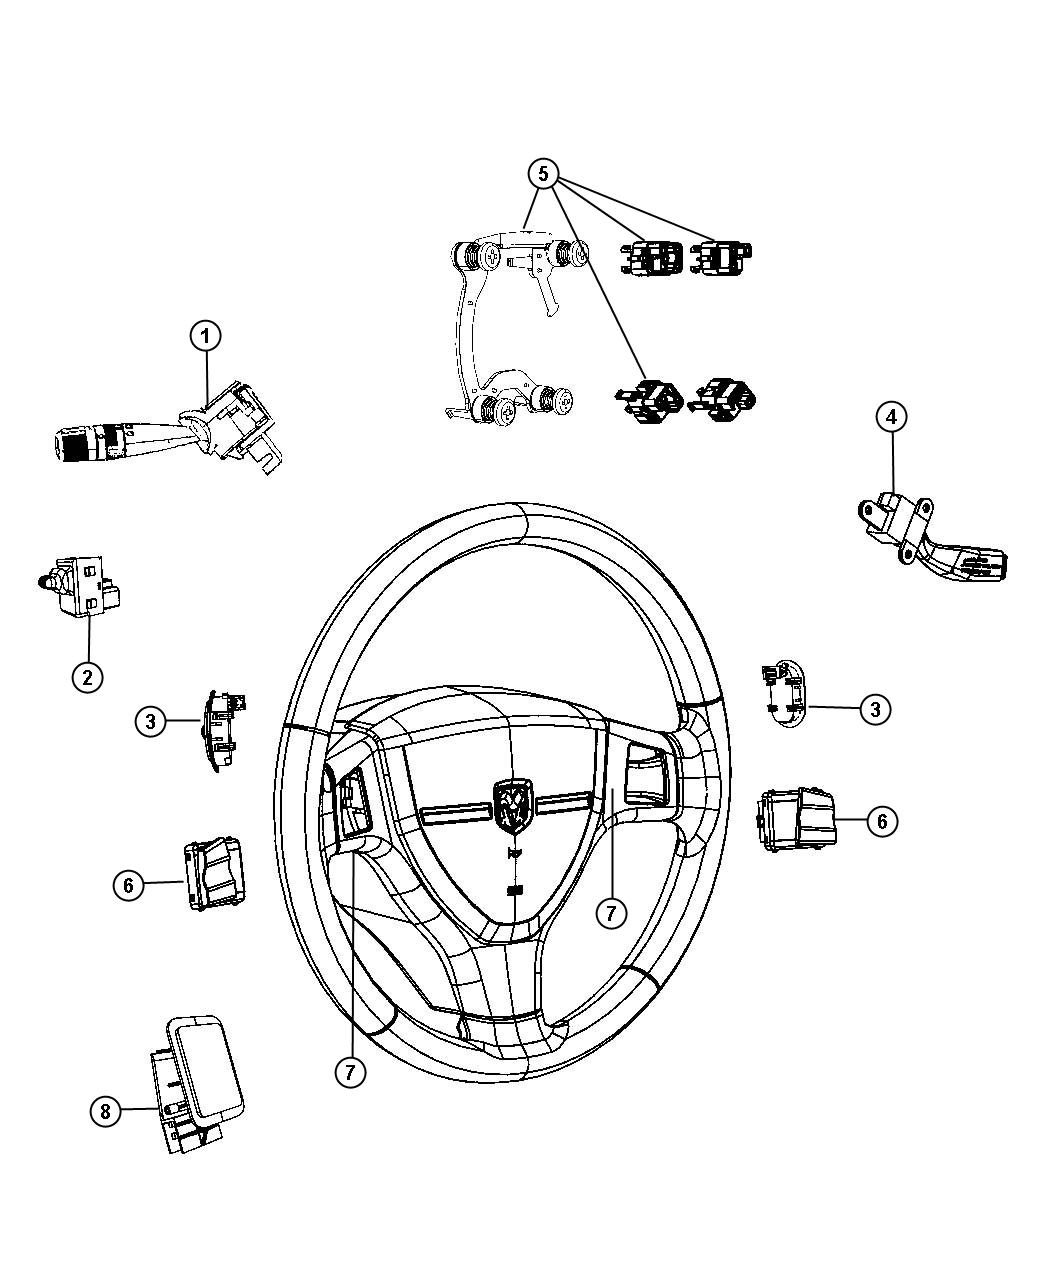 Switches Steering Column and Wheel. Diagram